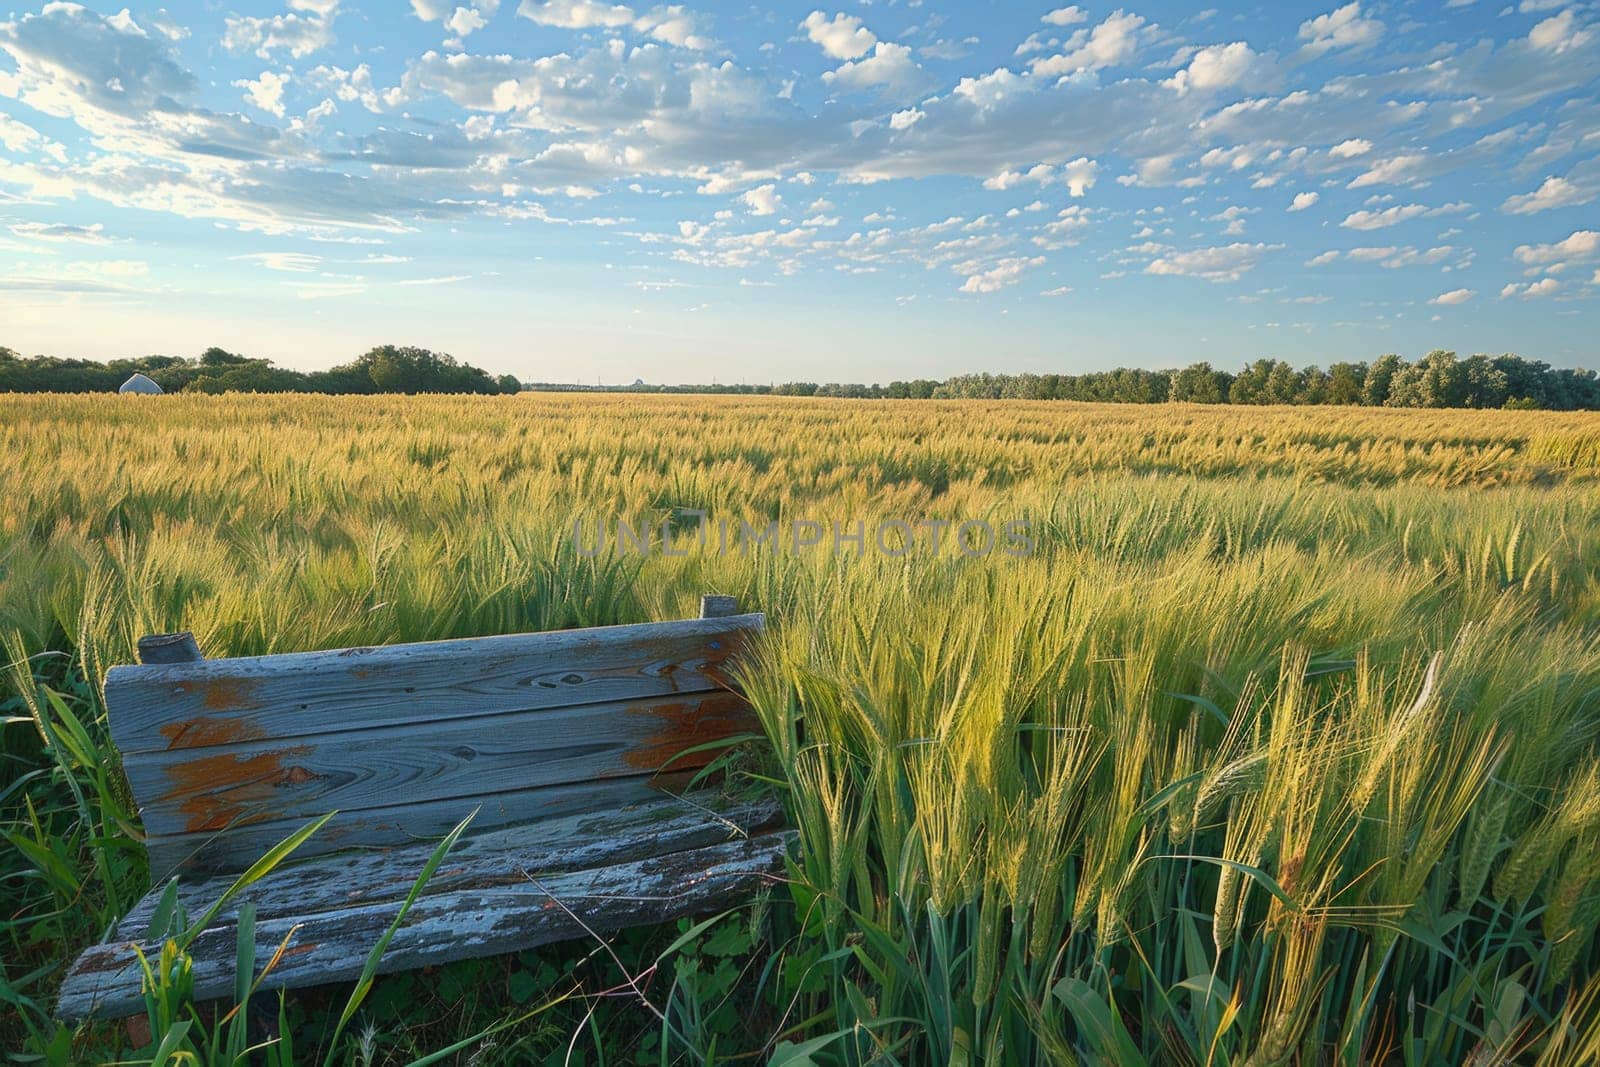 A lone bench nestled in a sea of tall grass, surrounded by natures tranquility and the gentle rustling of the wind.